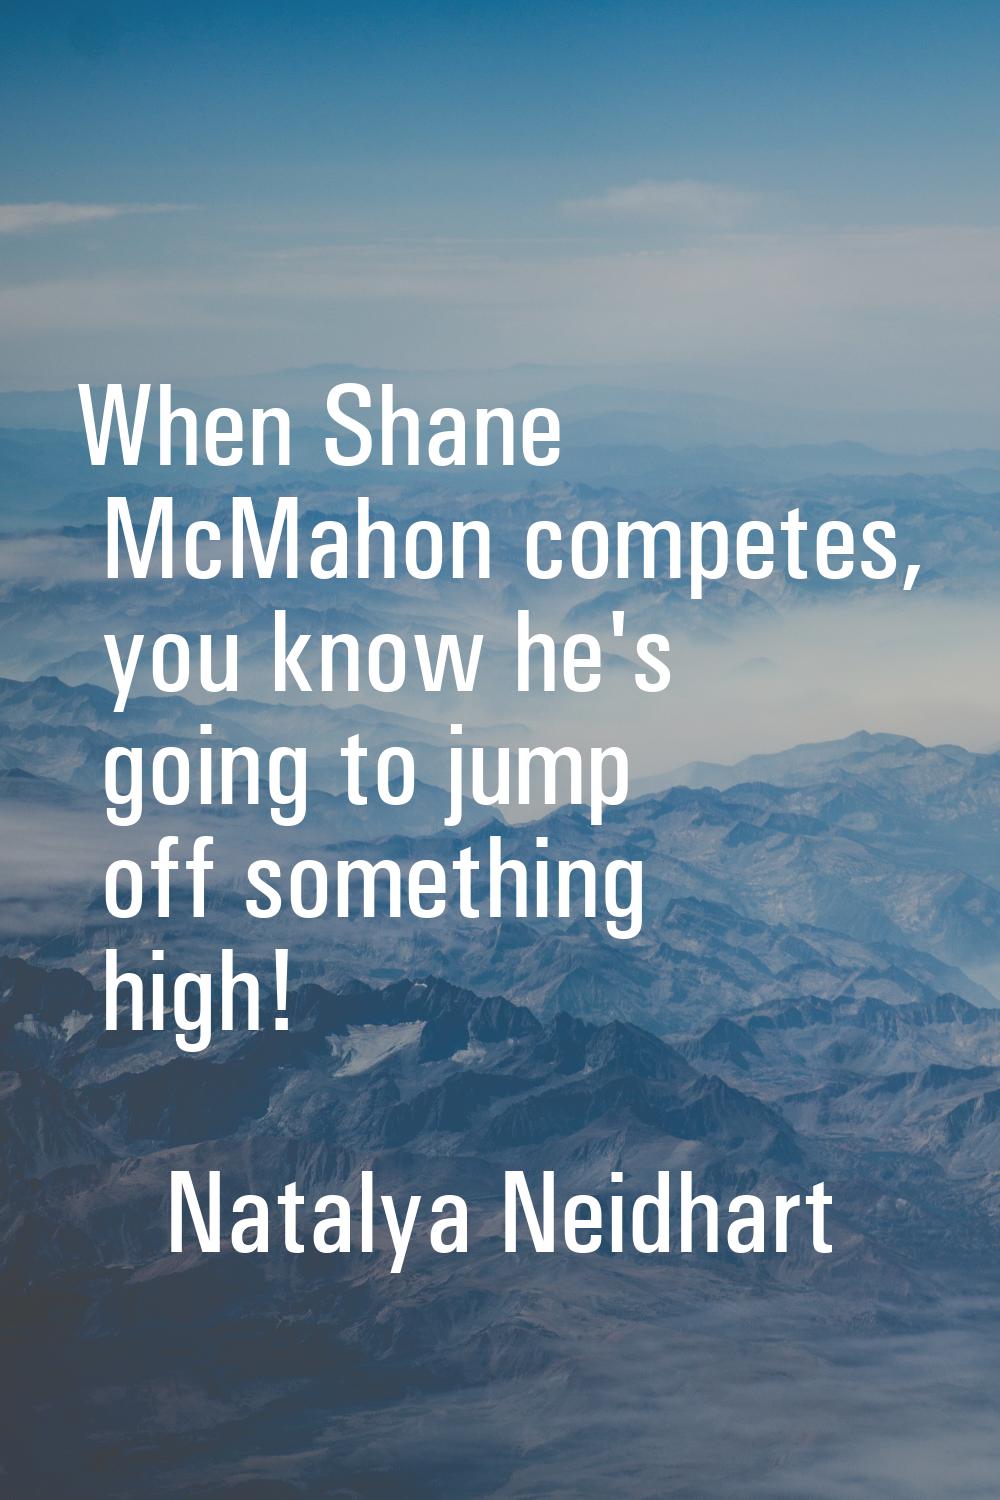 When Shane McMahon competes, you know he's going to jump off something high!